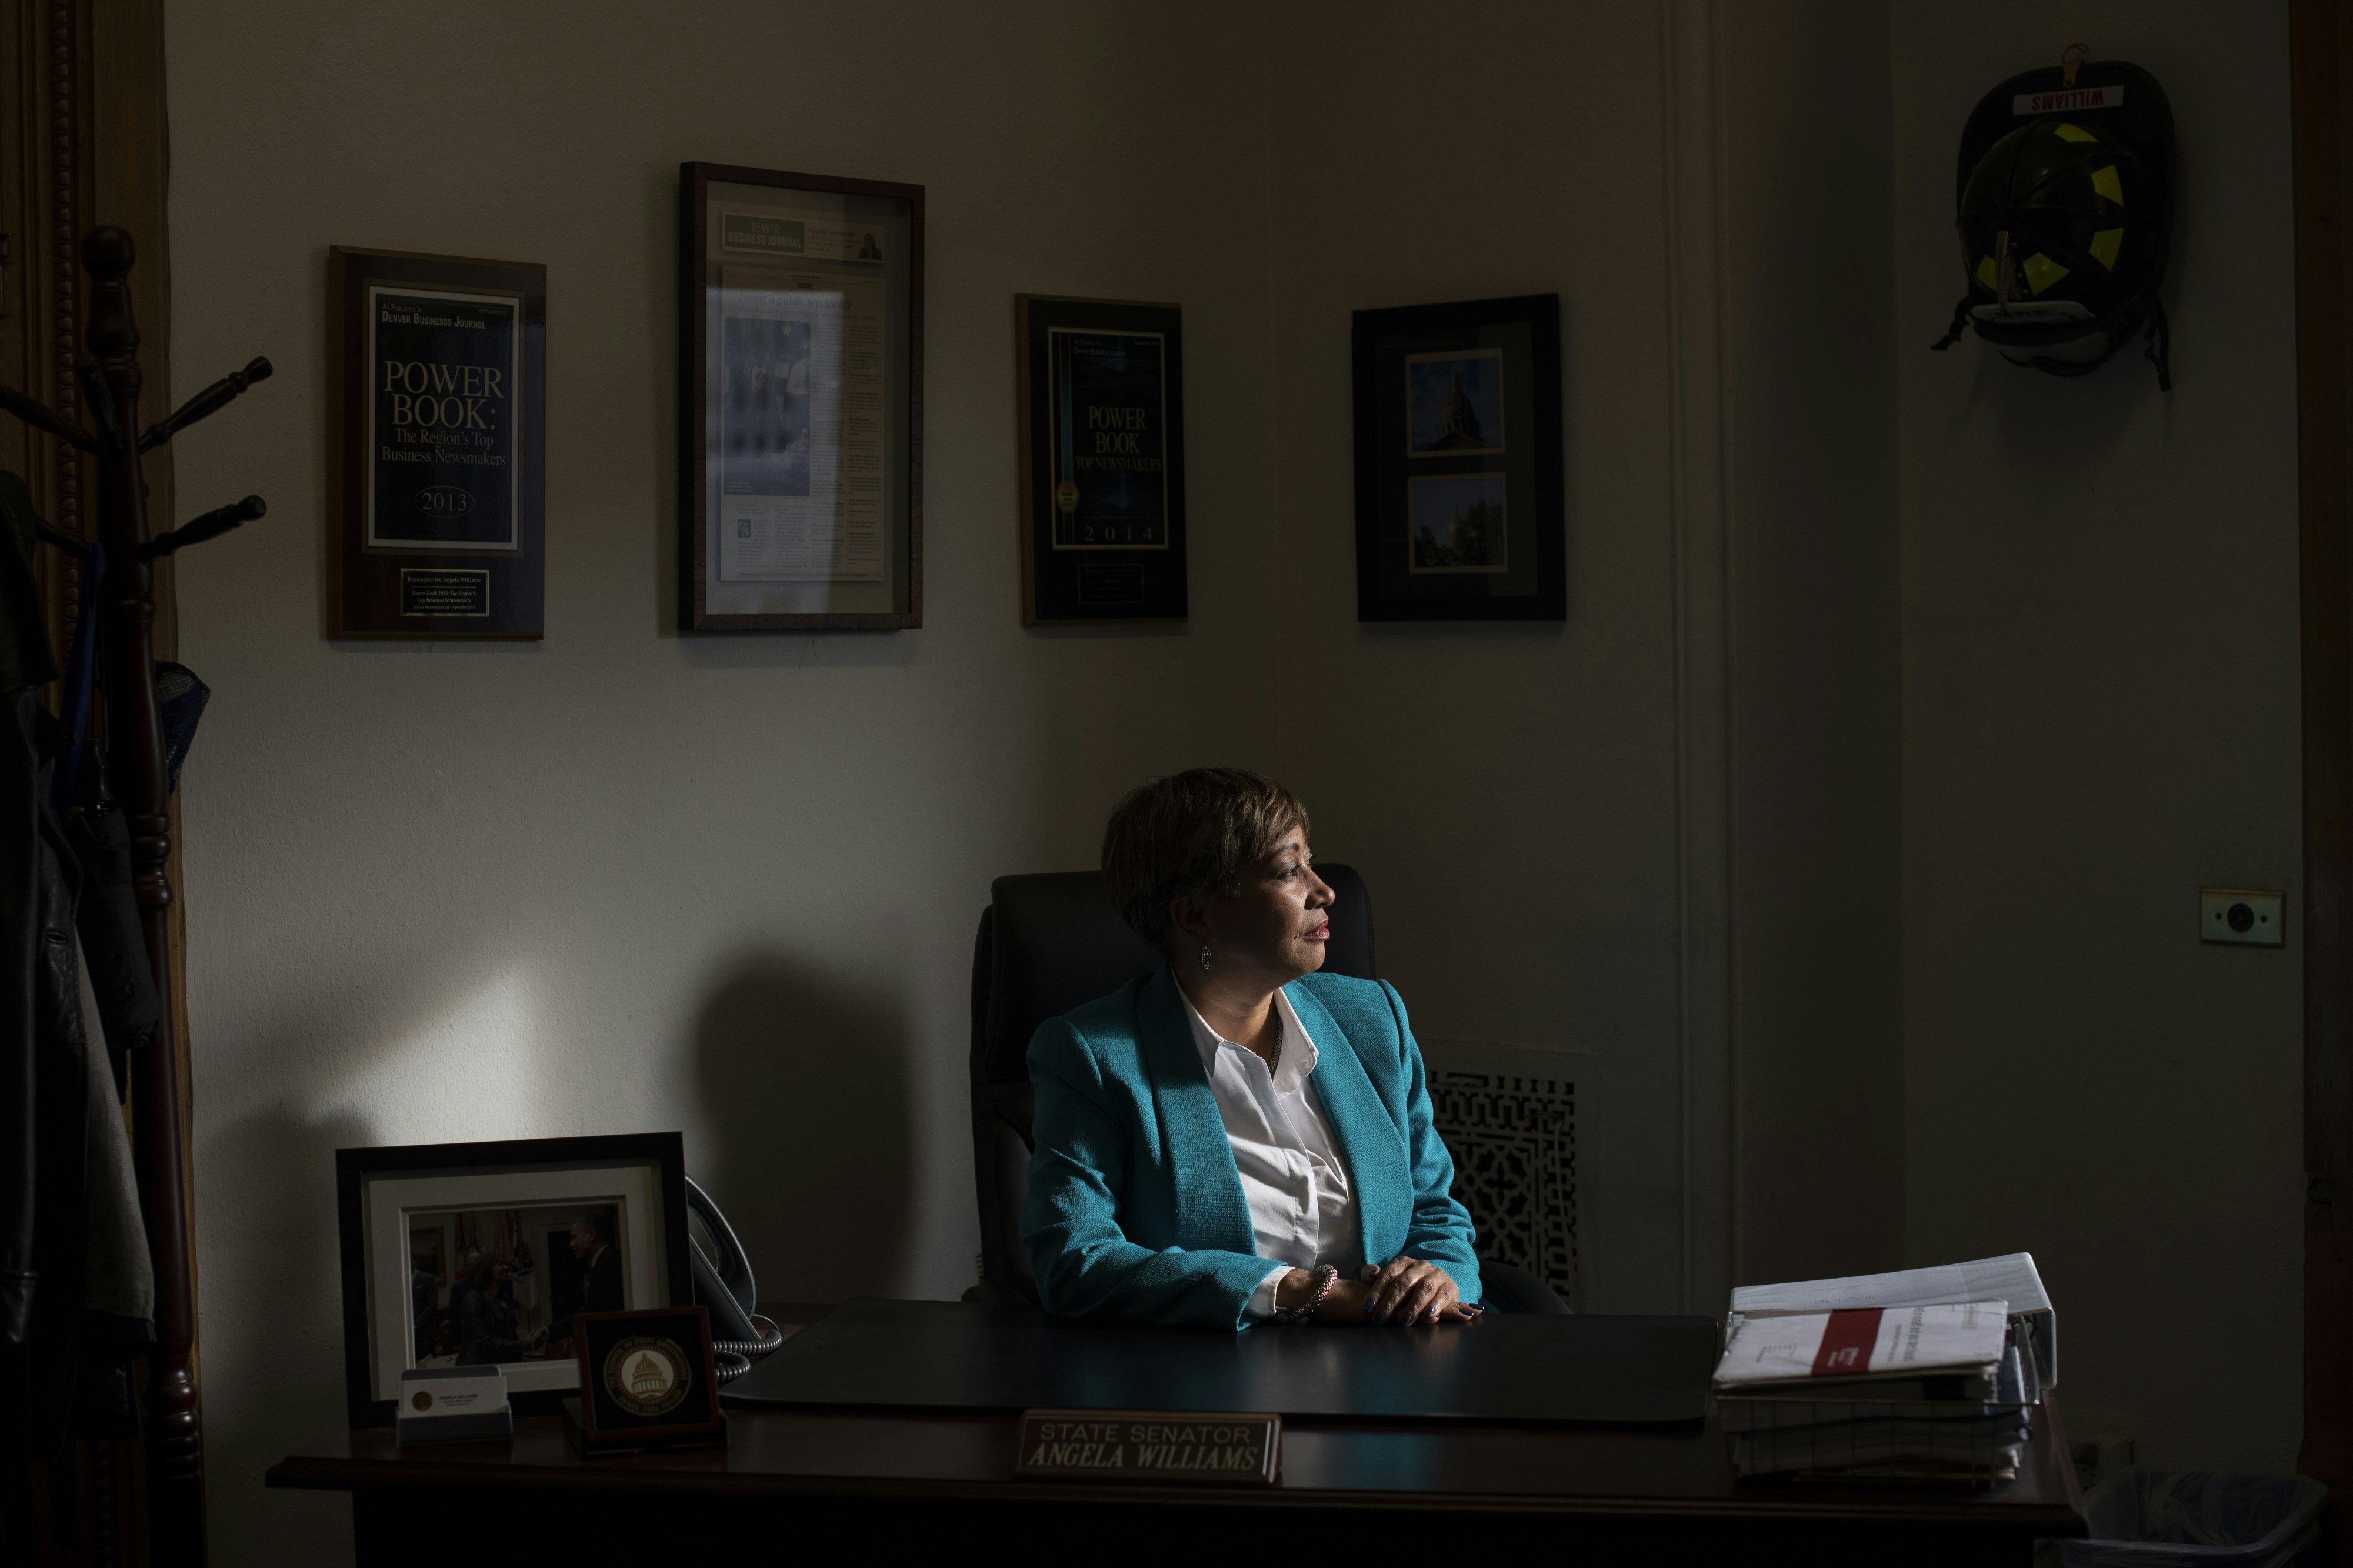 Colorado State Sen. Angela Williams poses in her office at the Colorado State Capitol in Denver, Colorado on Thursday, Nov. 14, 2019. Sen. Williams supports abolishing Colorado's death penalty. (Rachel Woolf for The Intercept)